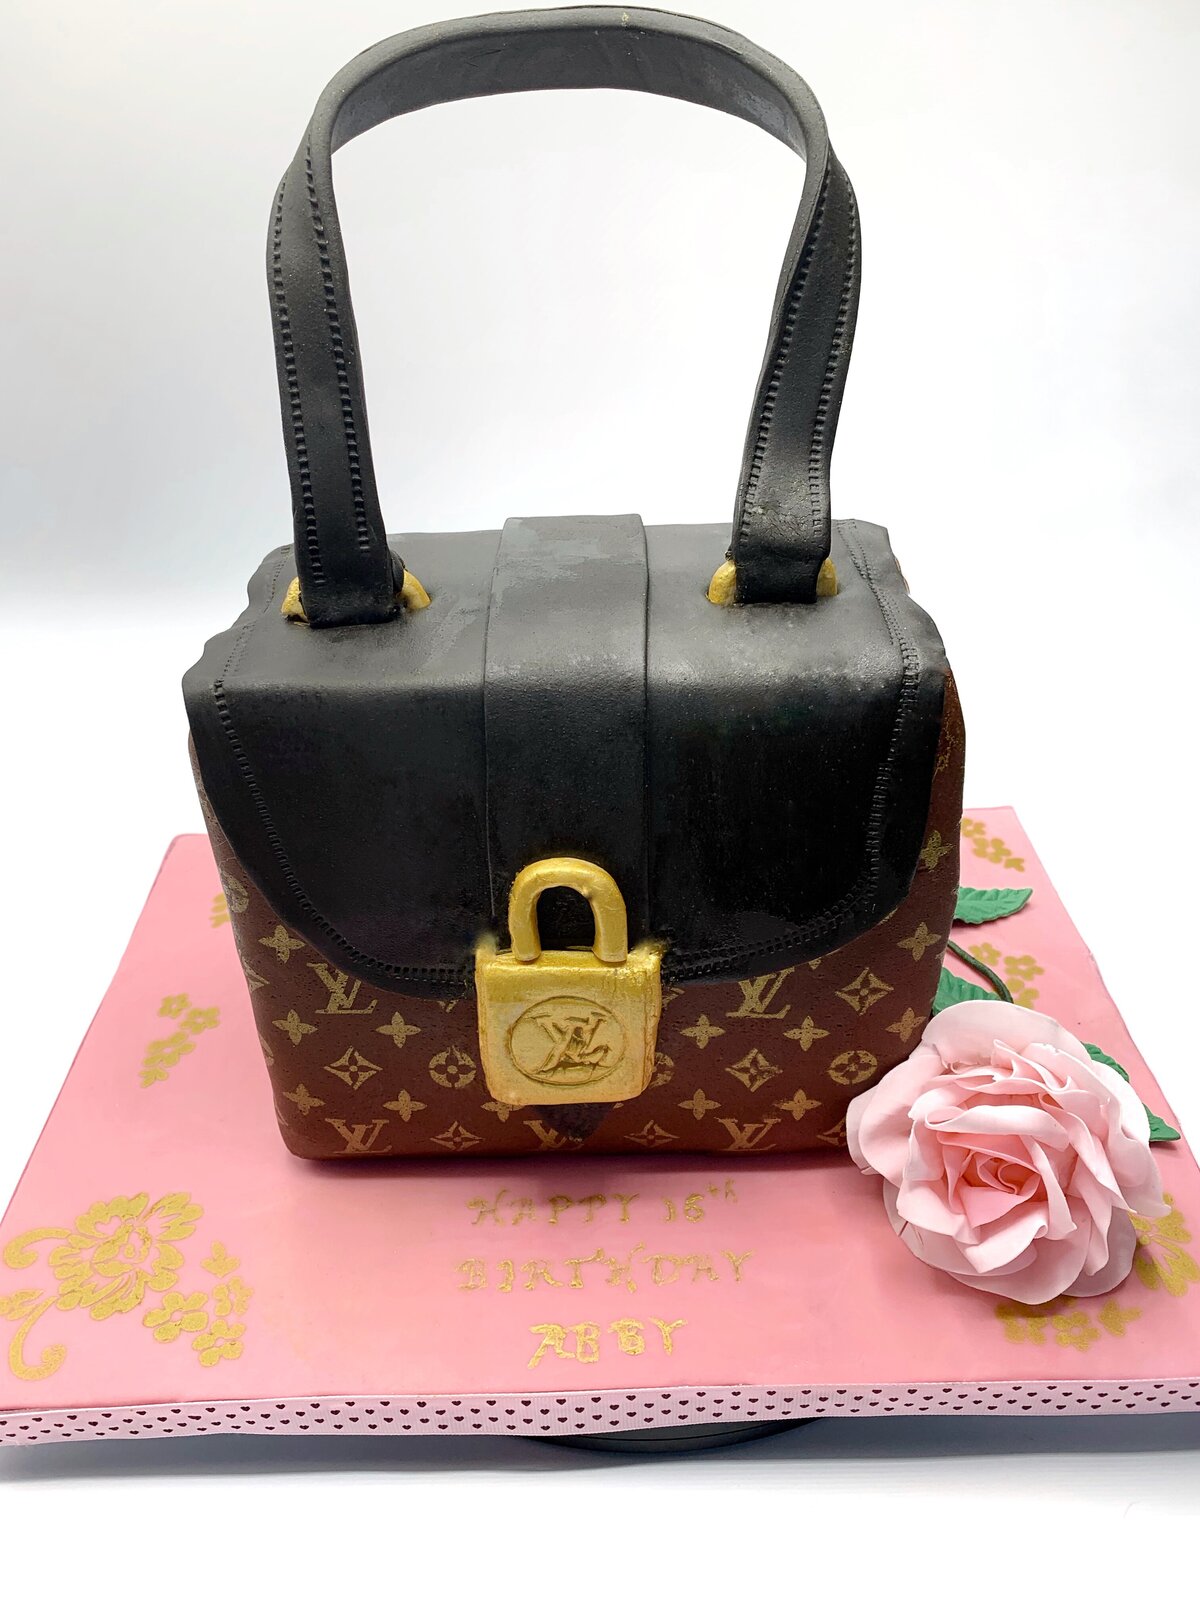 Black and brown Louis Vuitton inspired handbag cake with gold lock and LV logo accents.